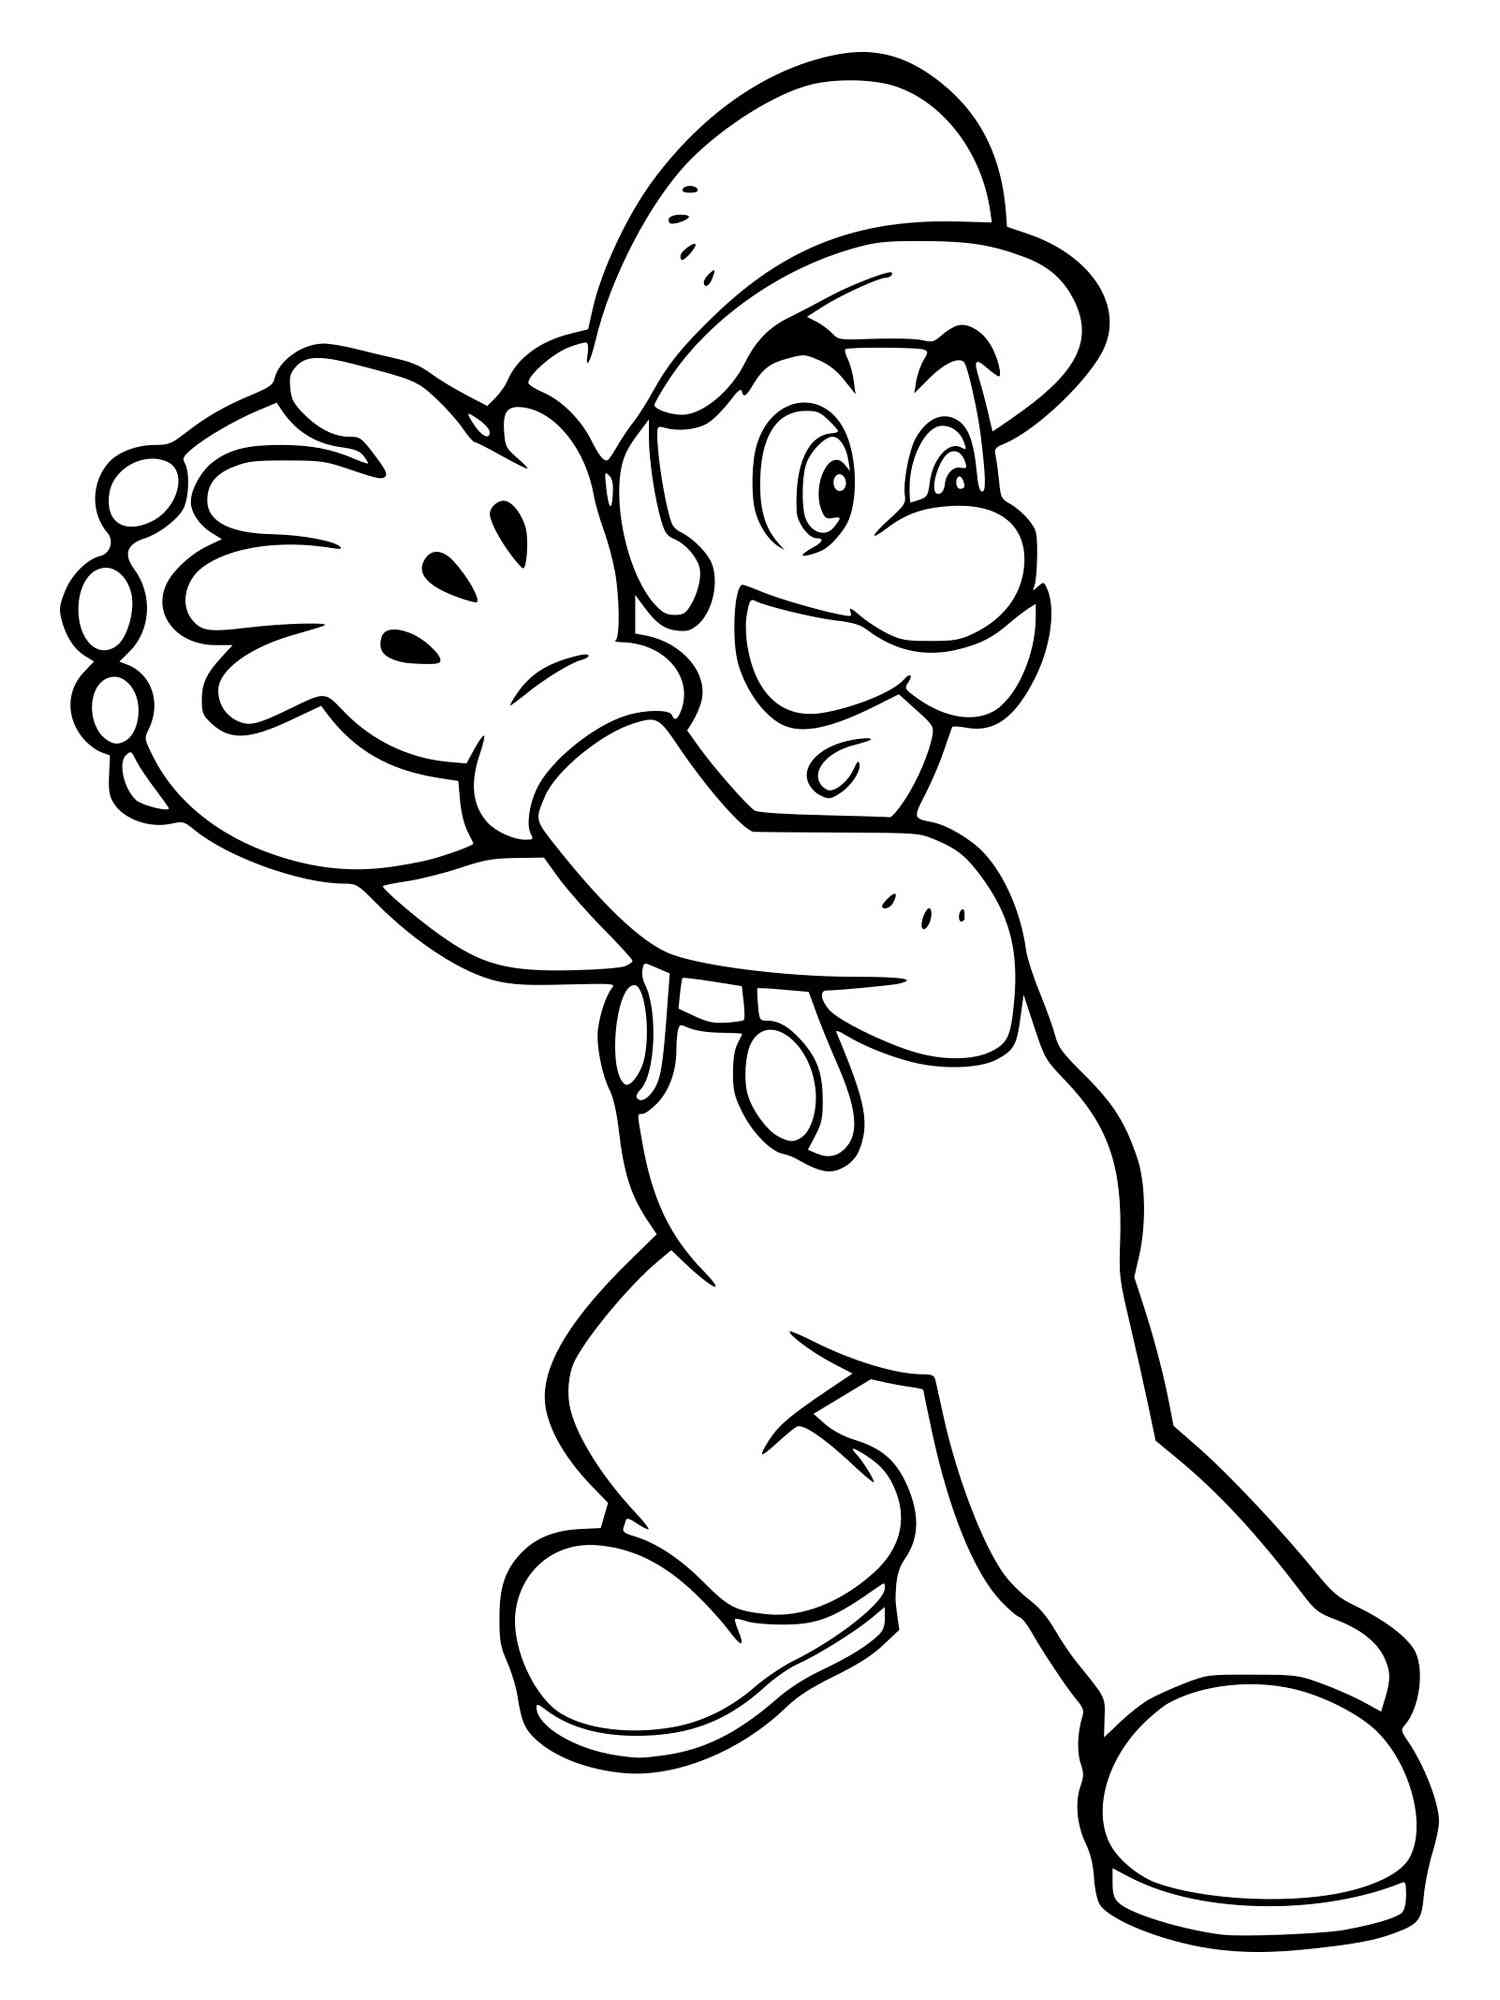 Luigi with bowling ball coloring page